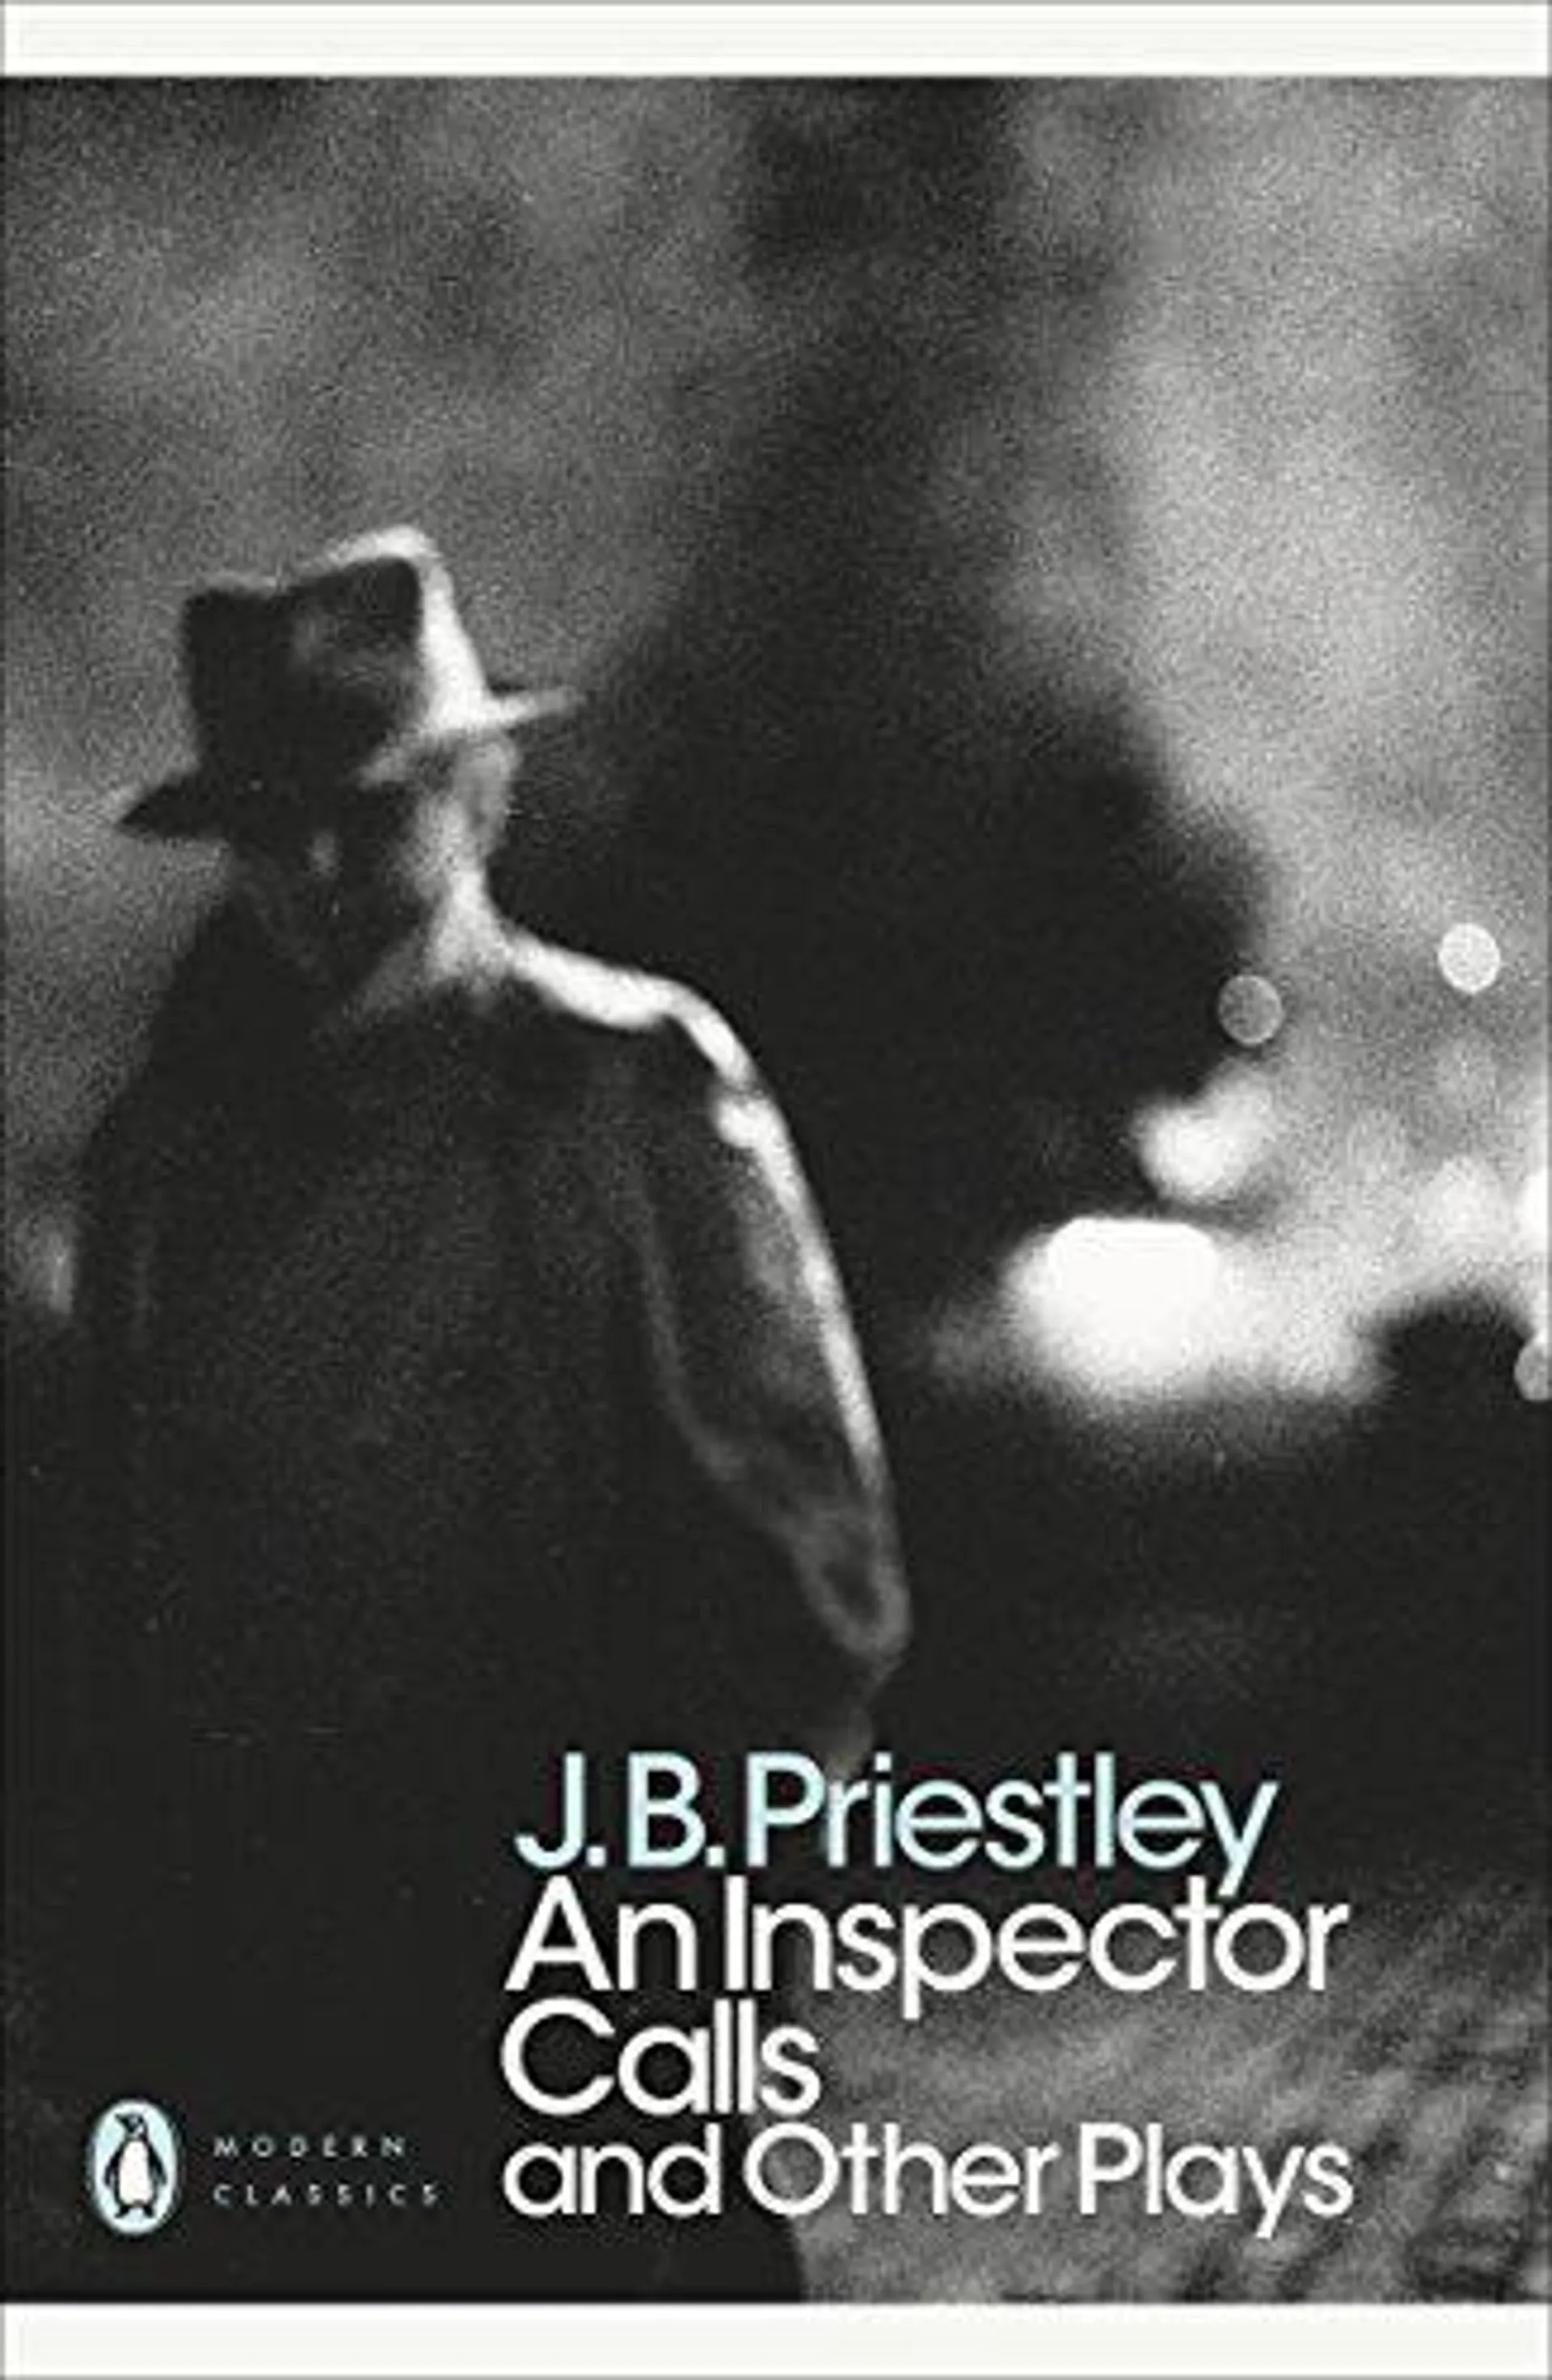 An Inspector Calls and Other Plays by J B Priestley